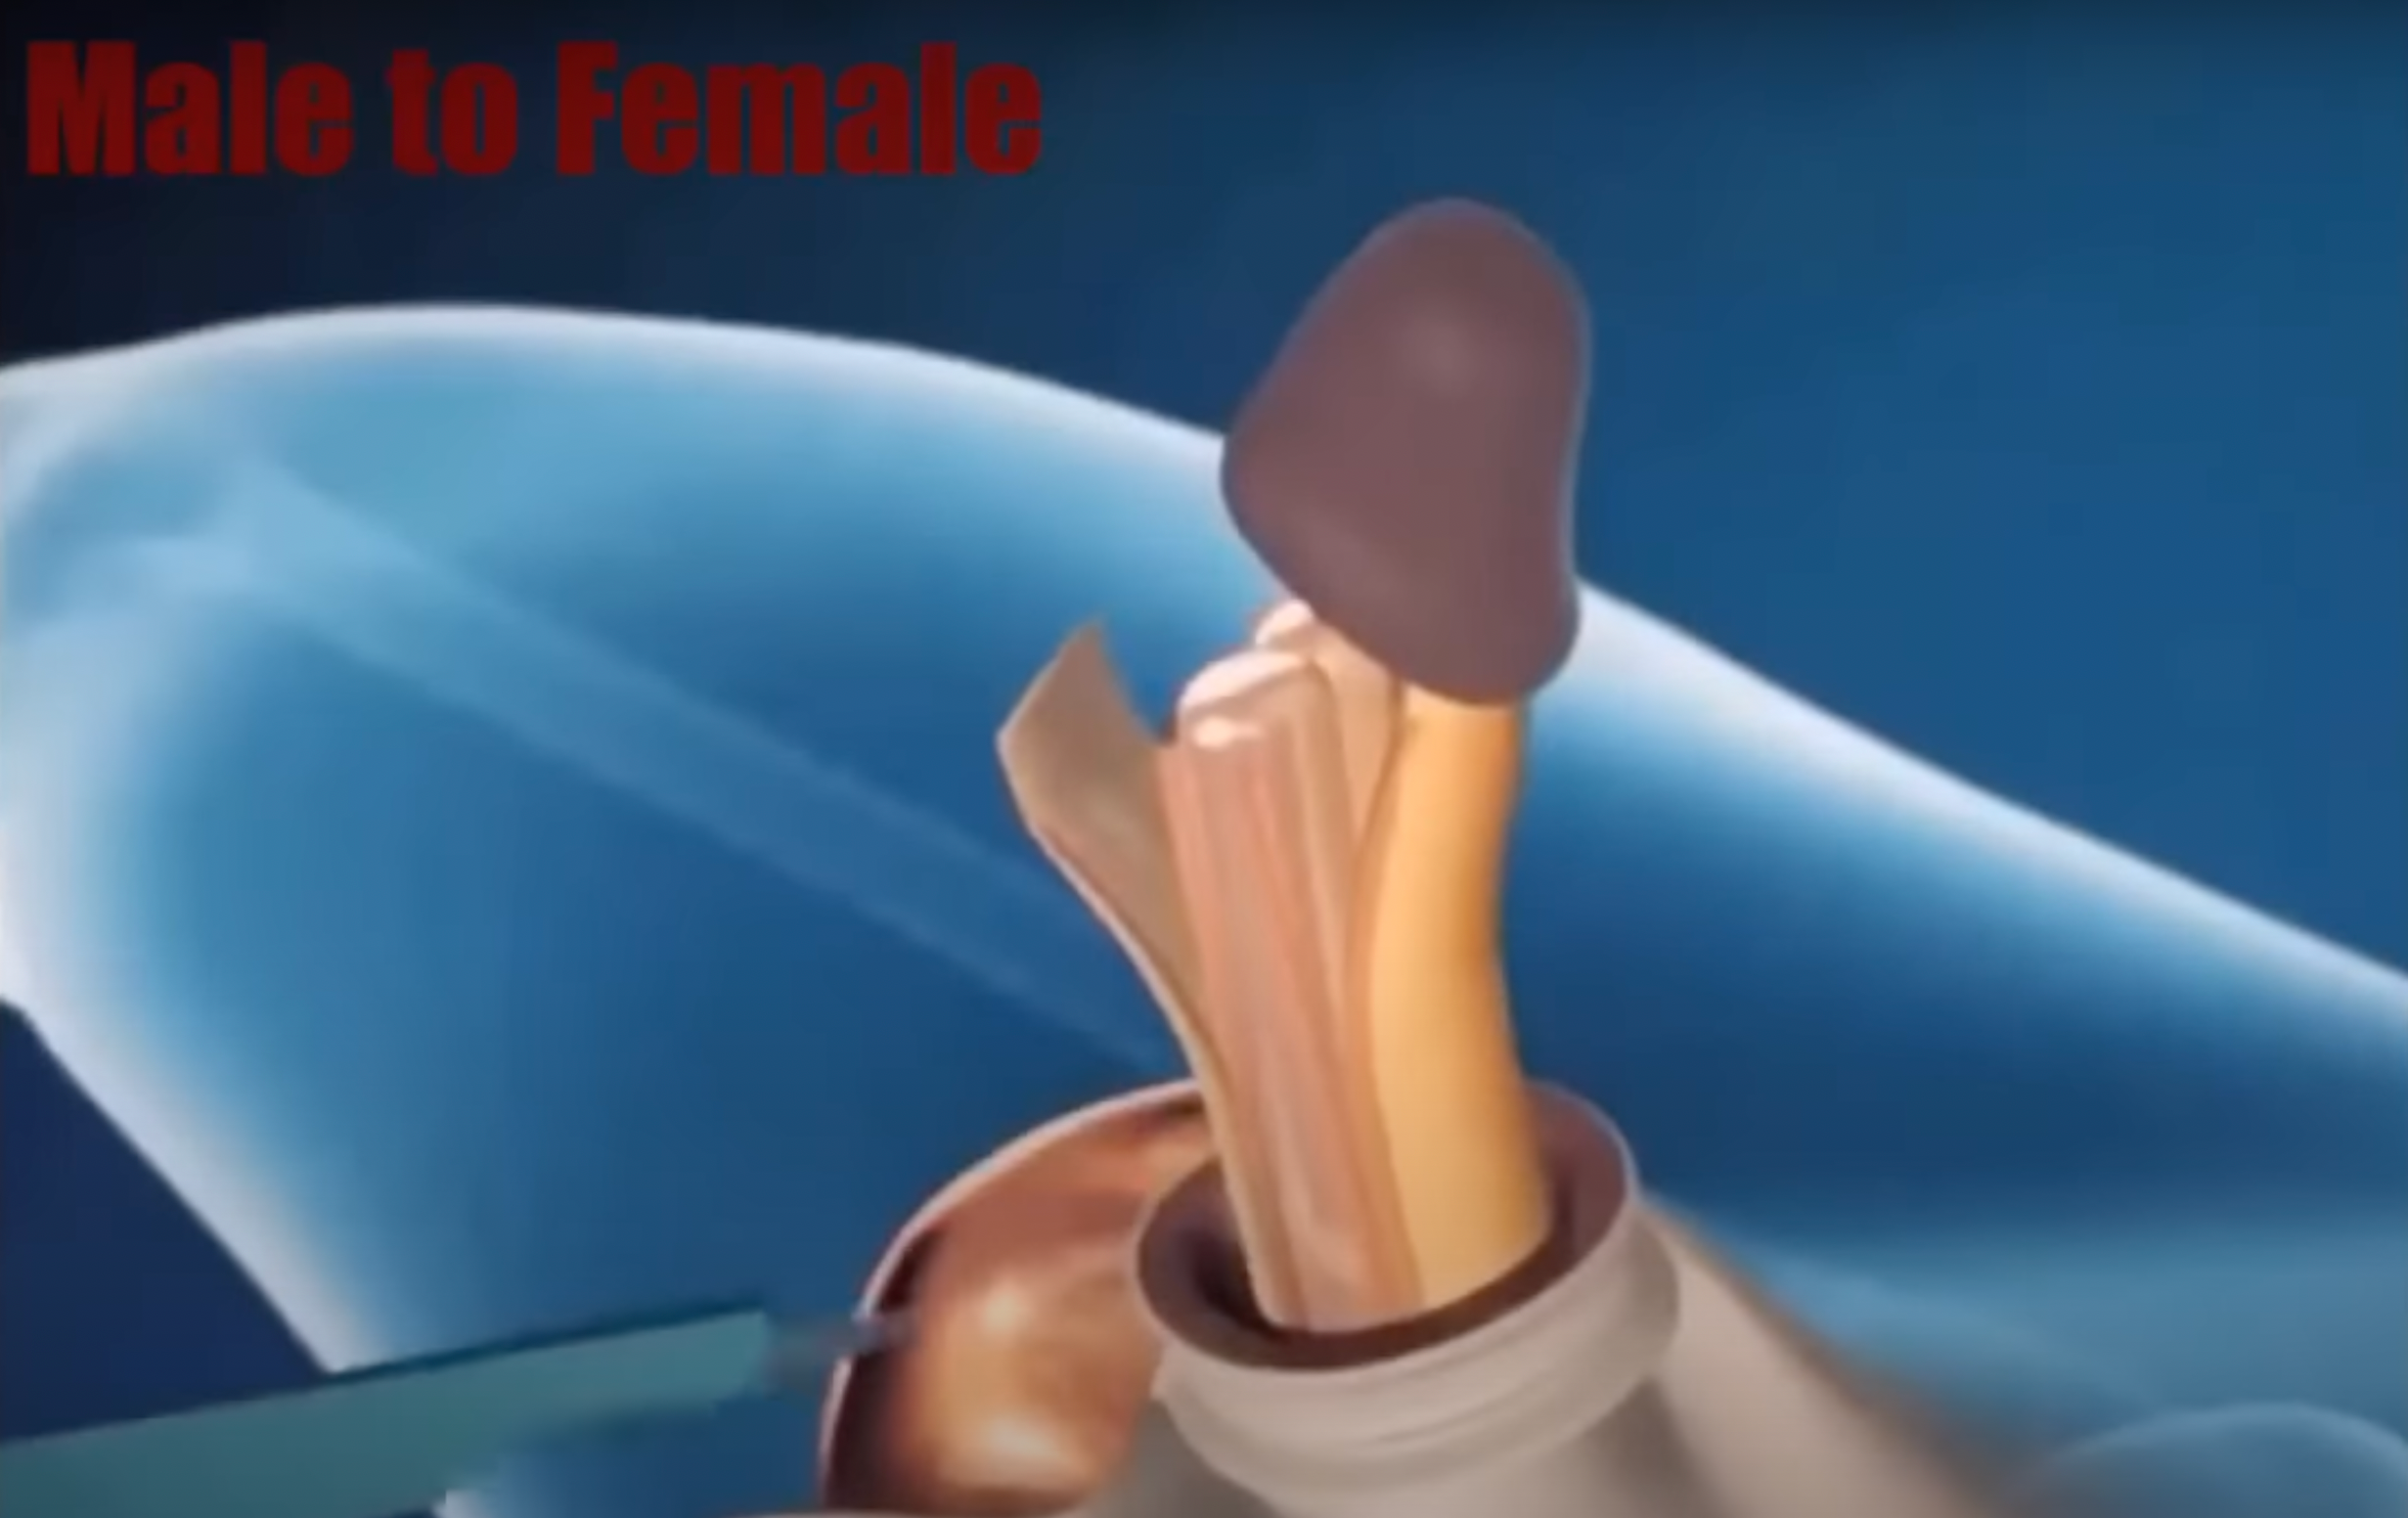 Video showing male to female surgery is 'fascinating' viewers